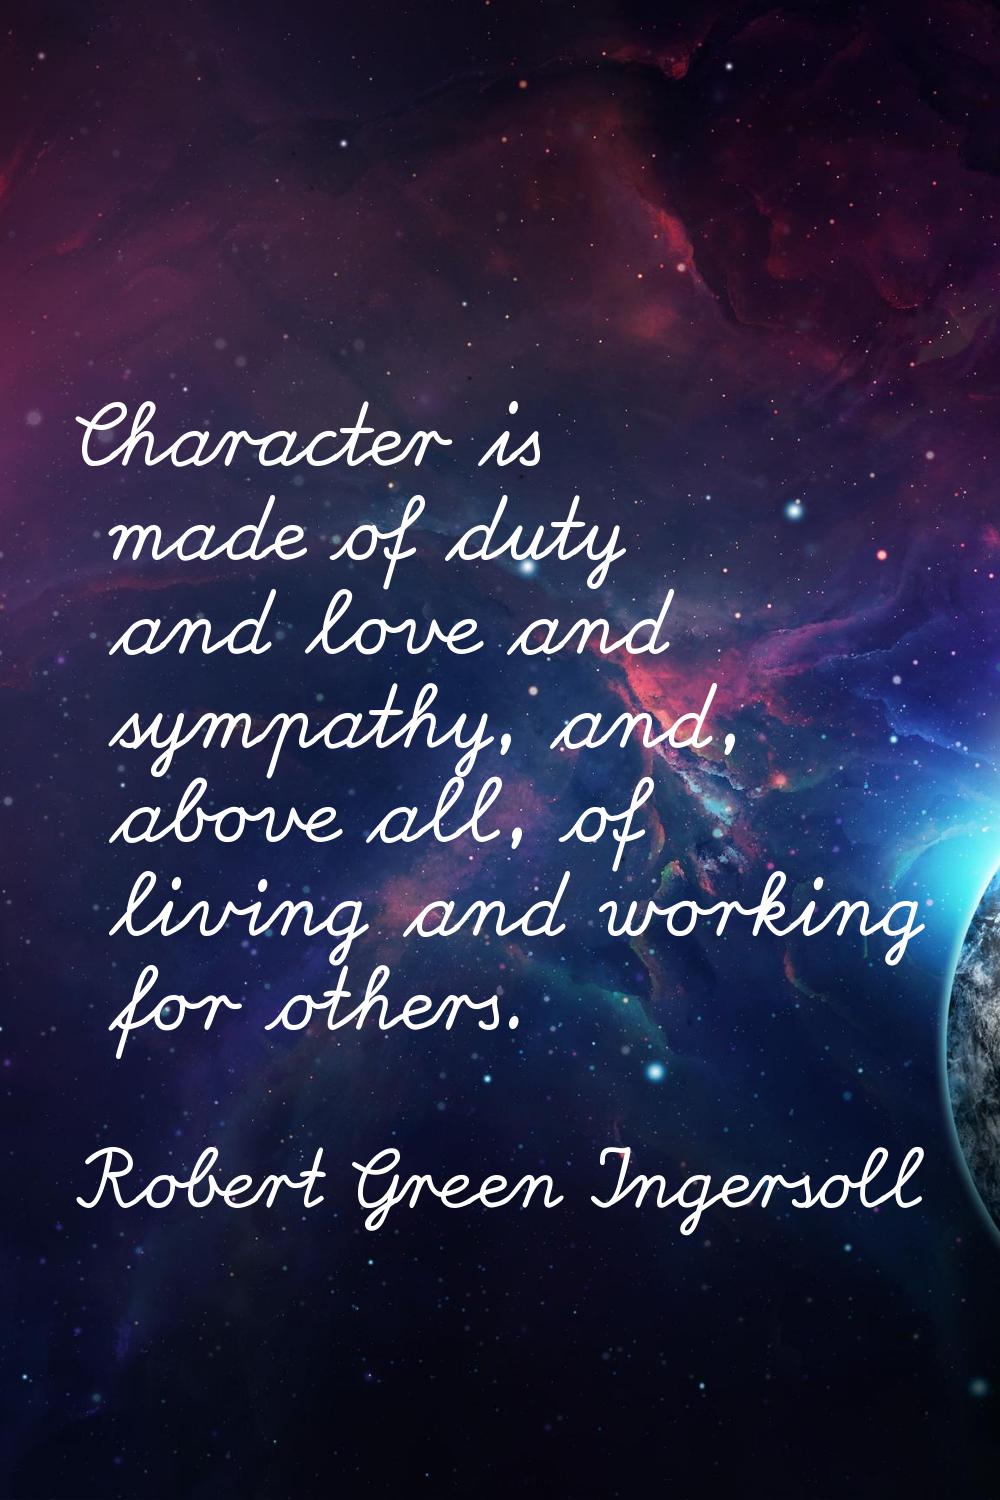 Character is made of duty and love and sympathy, and, above all, of living and working for others.